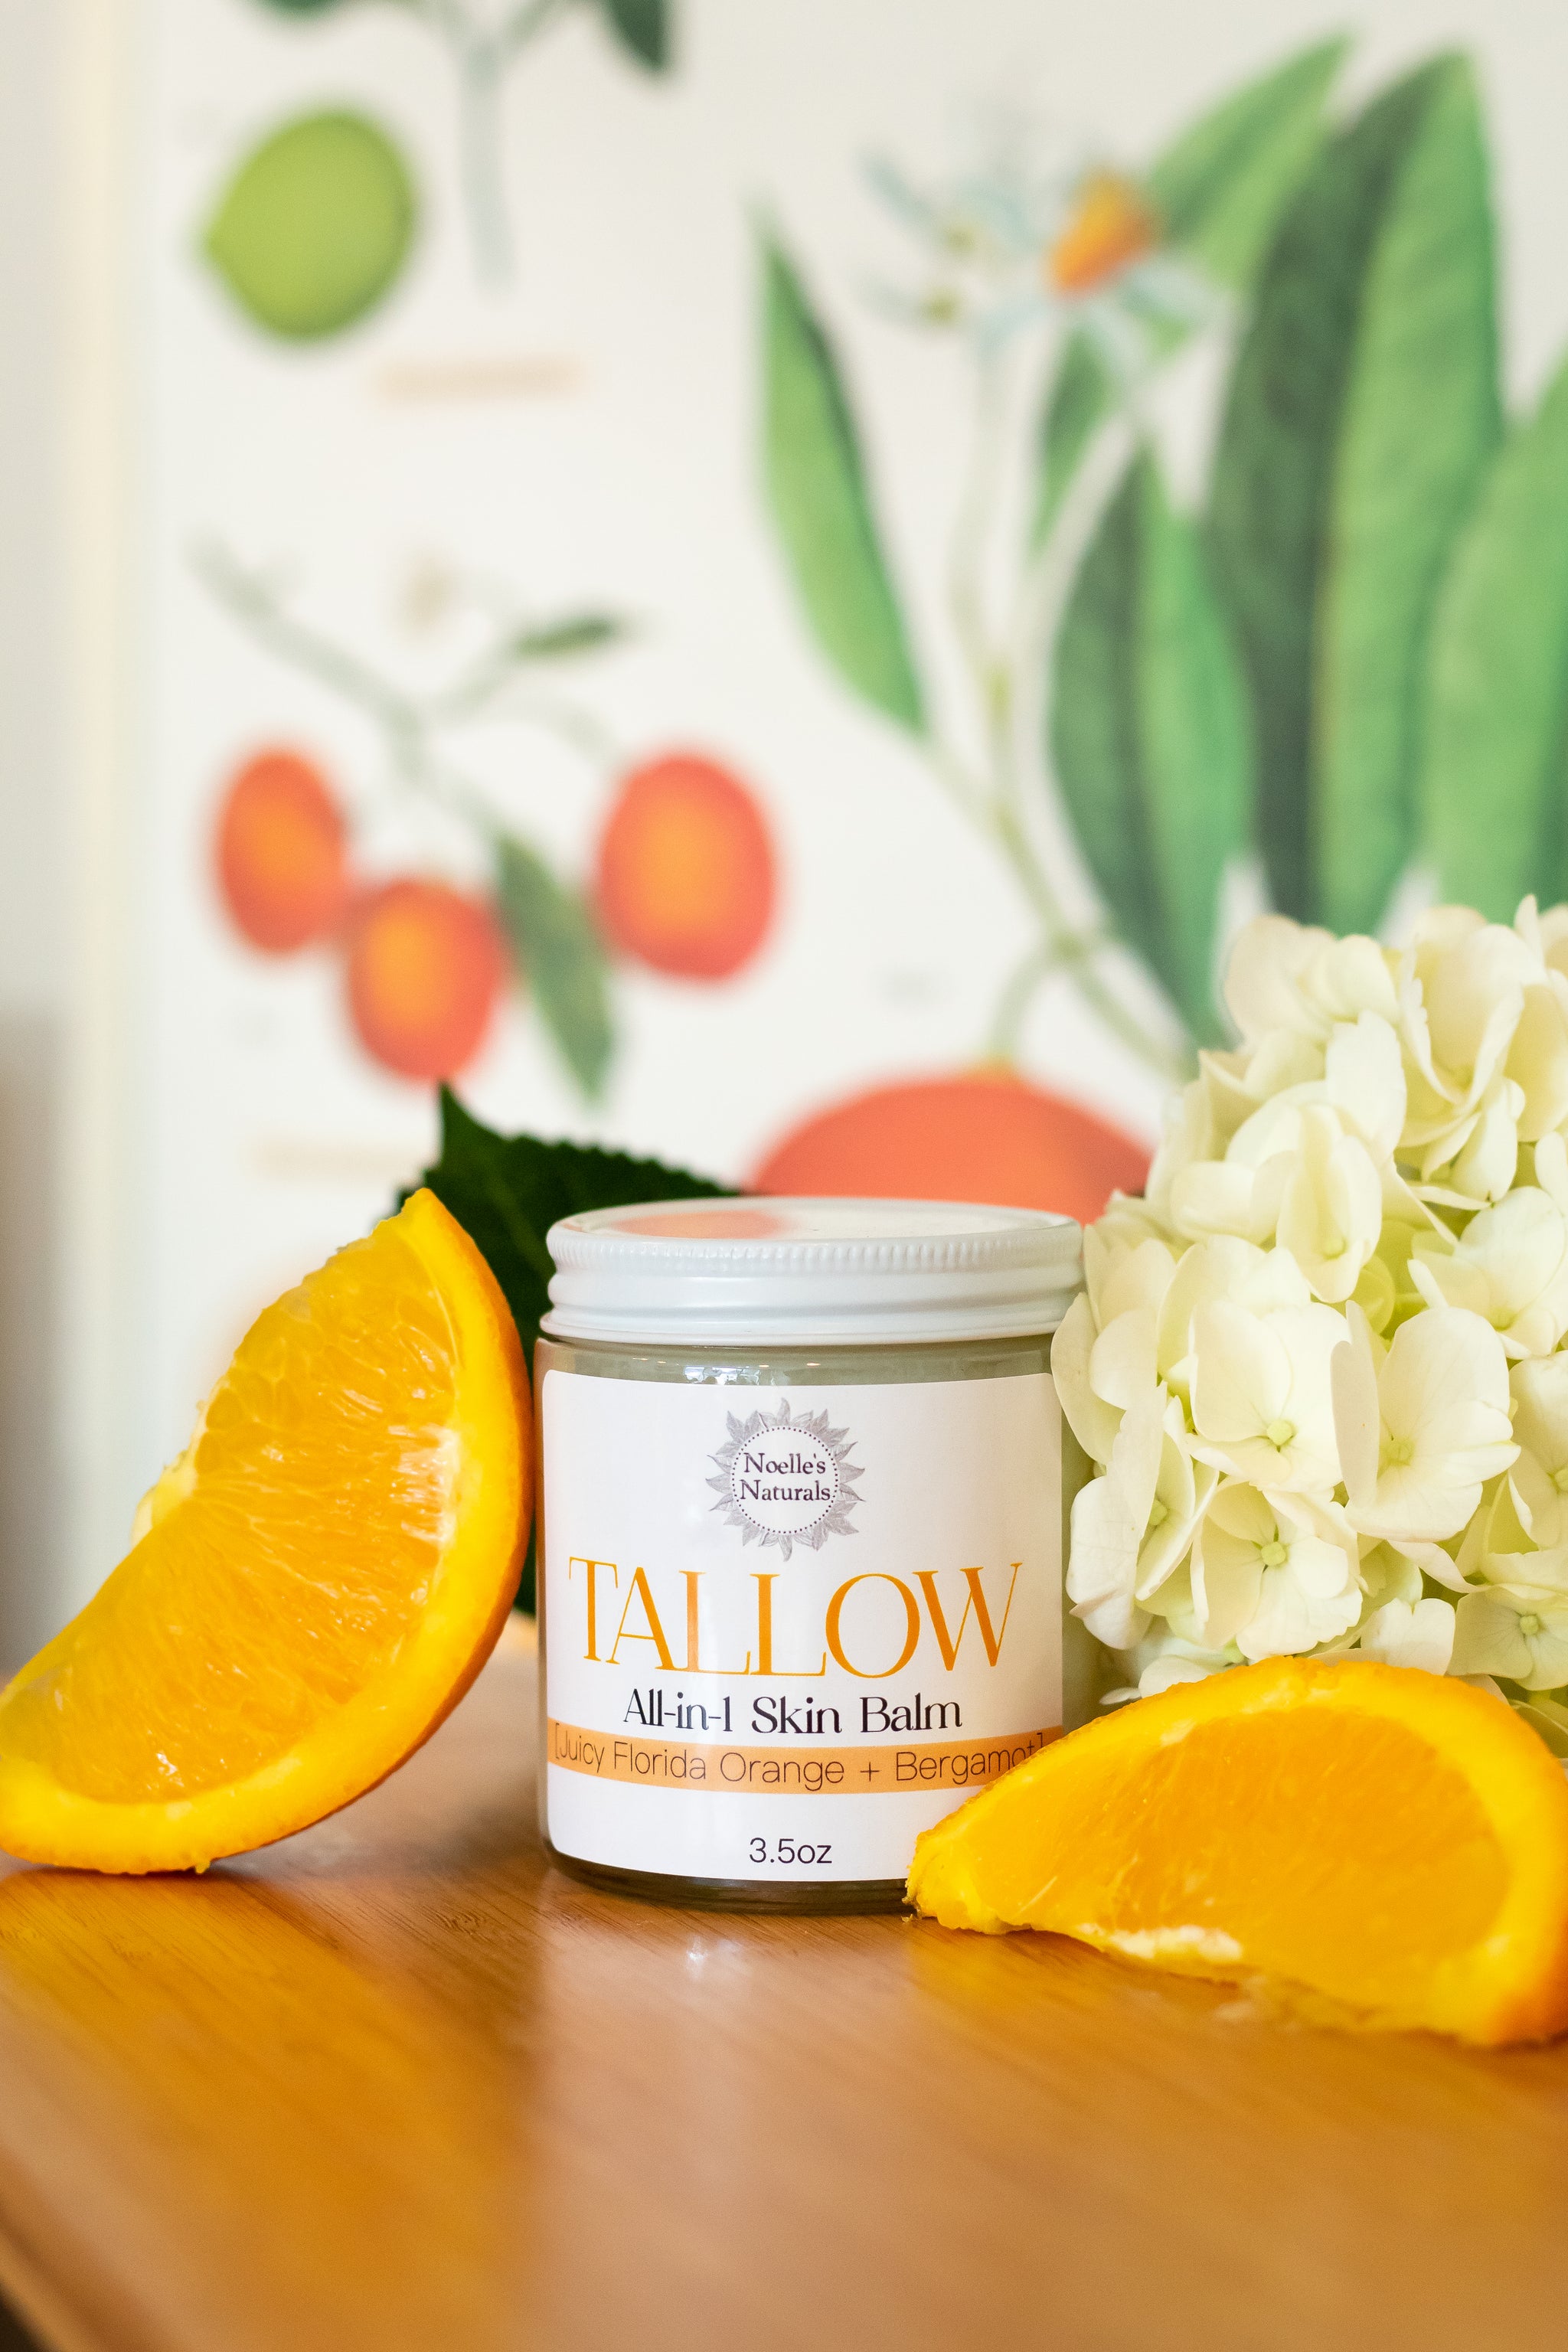 Tallow Balm for Her